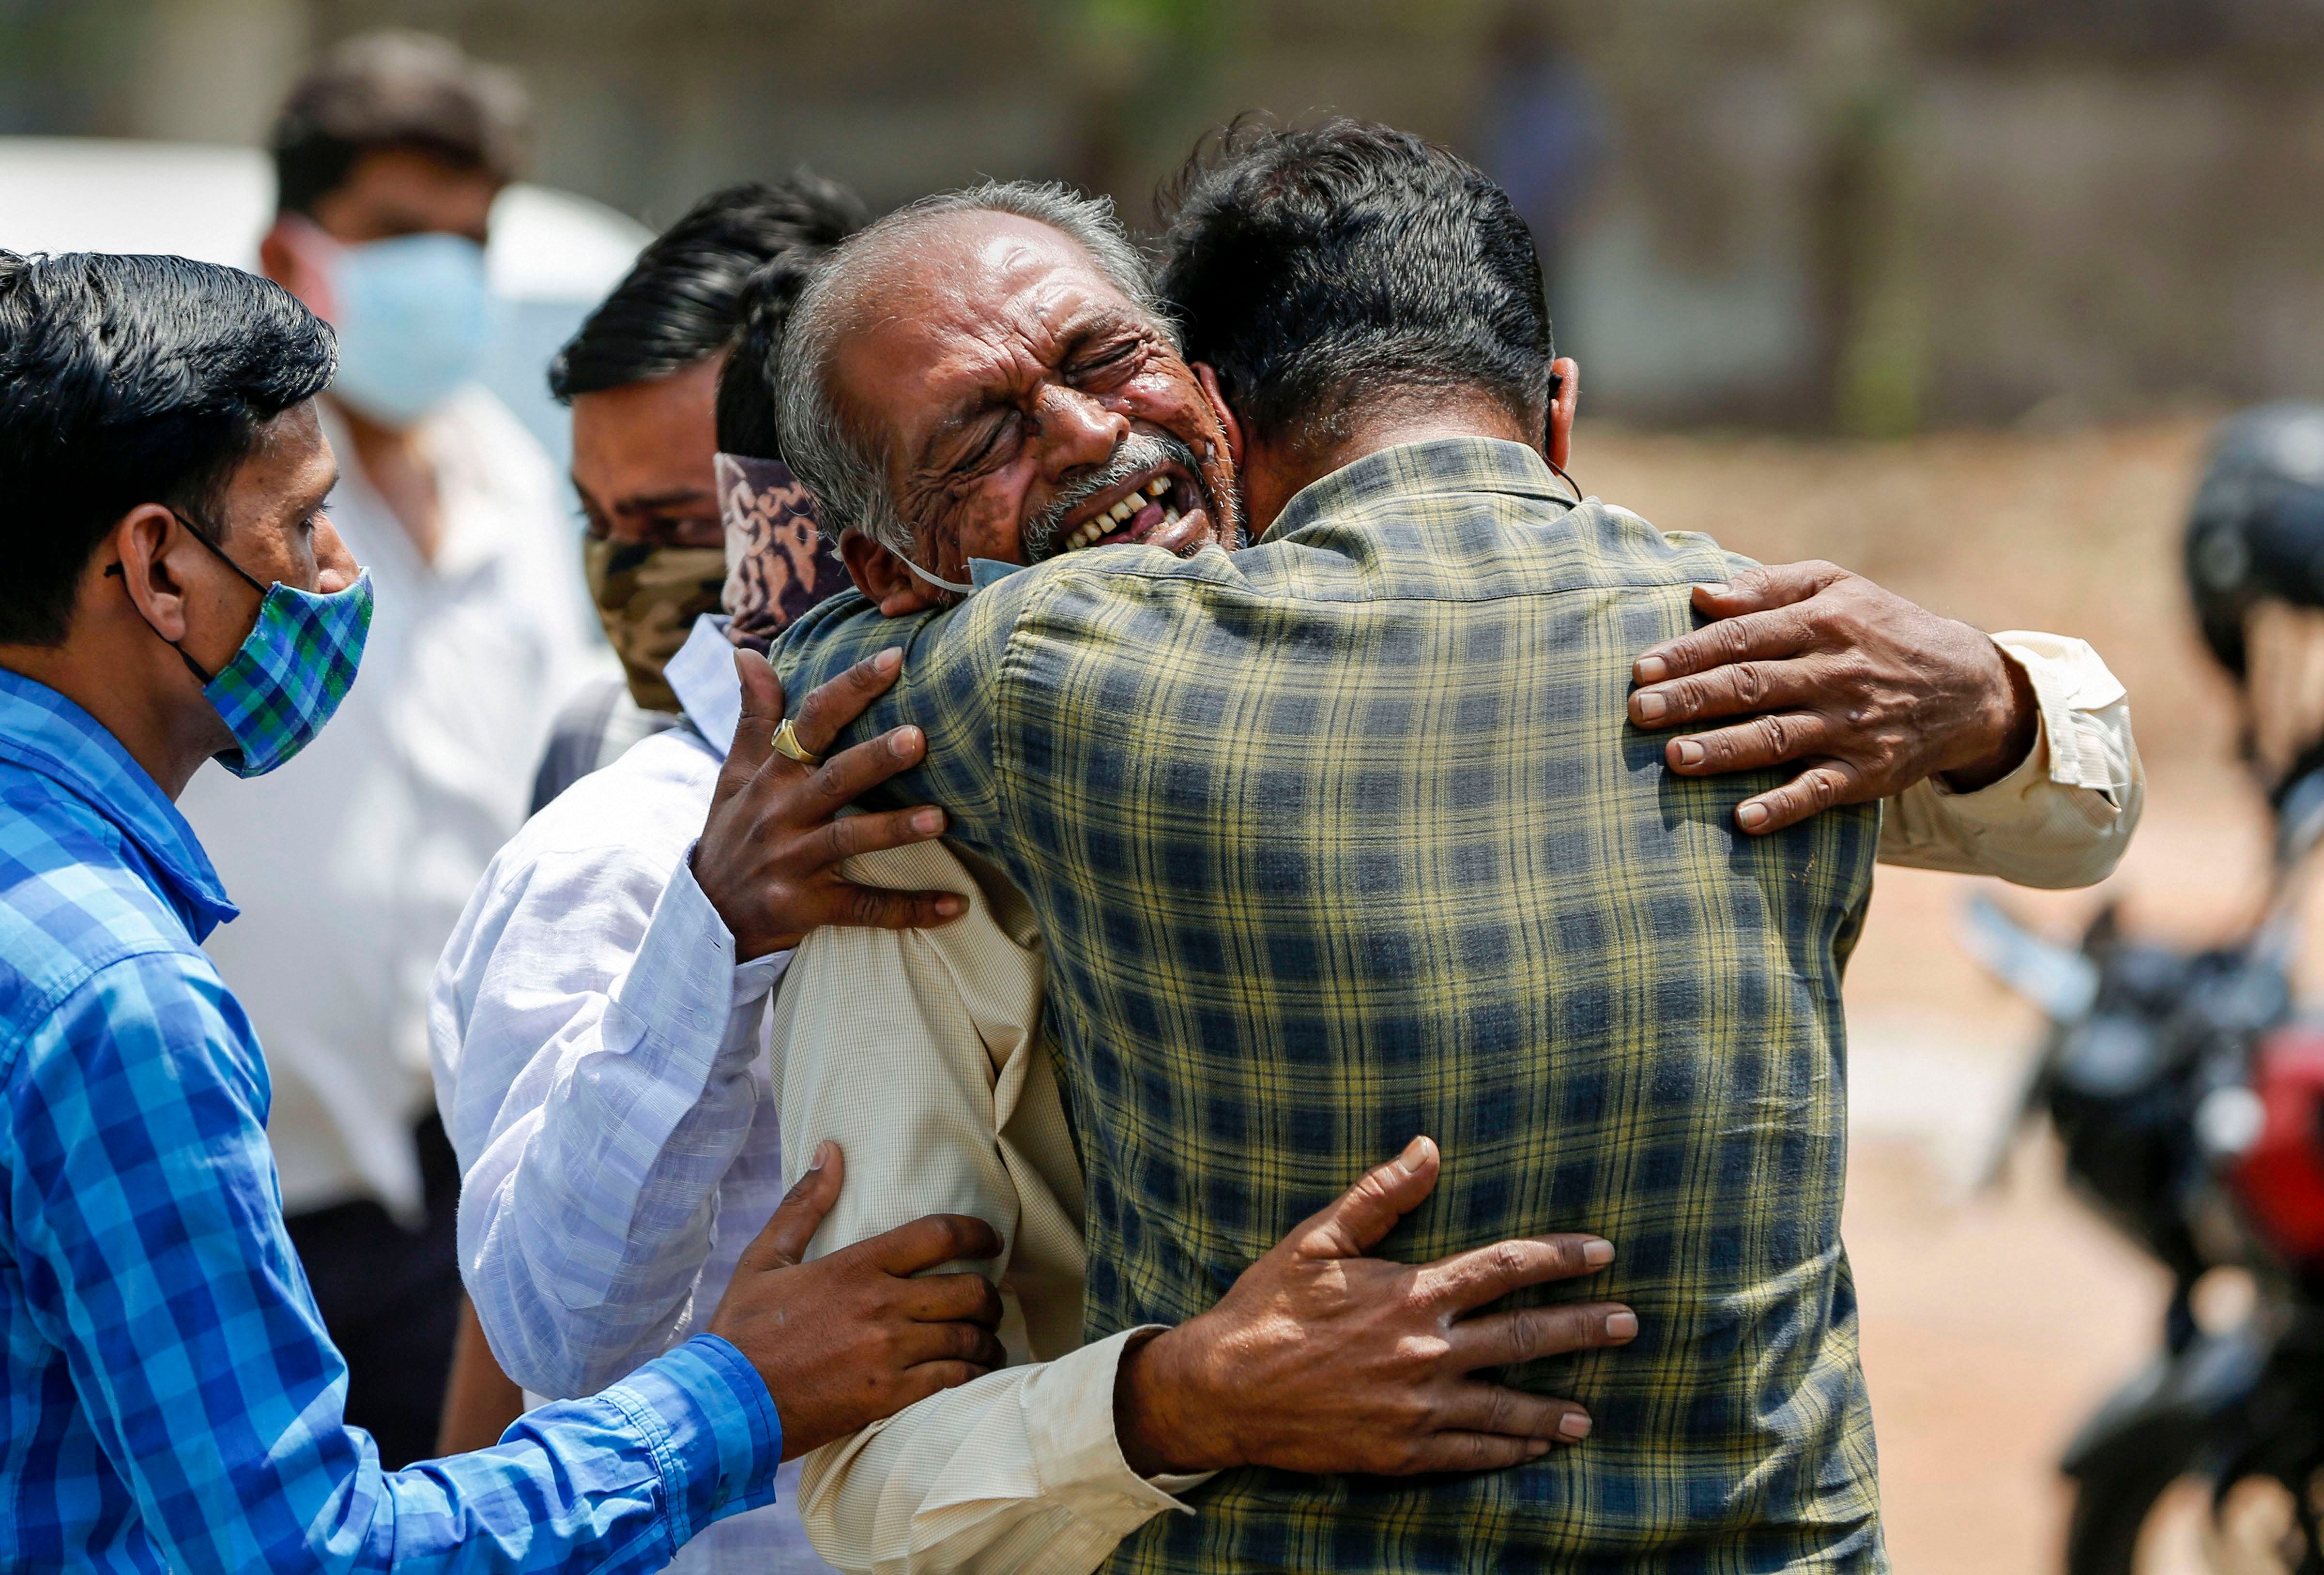 Bodies, grief pile on as Covid-19 chokes India